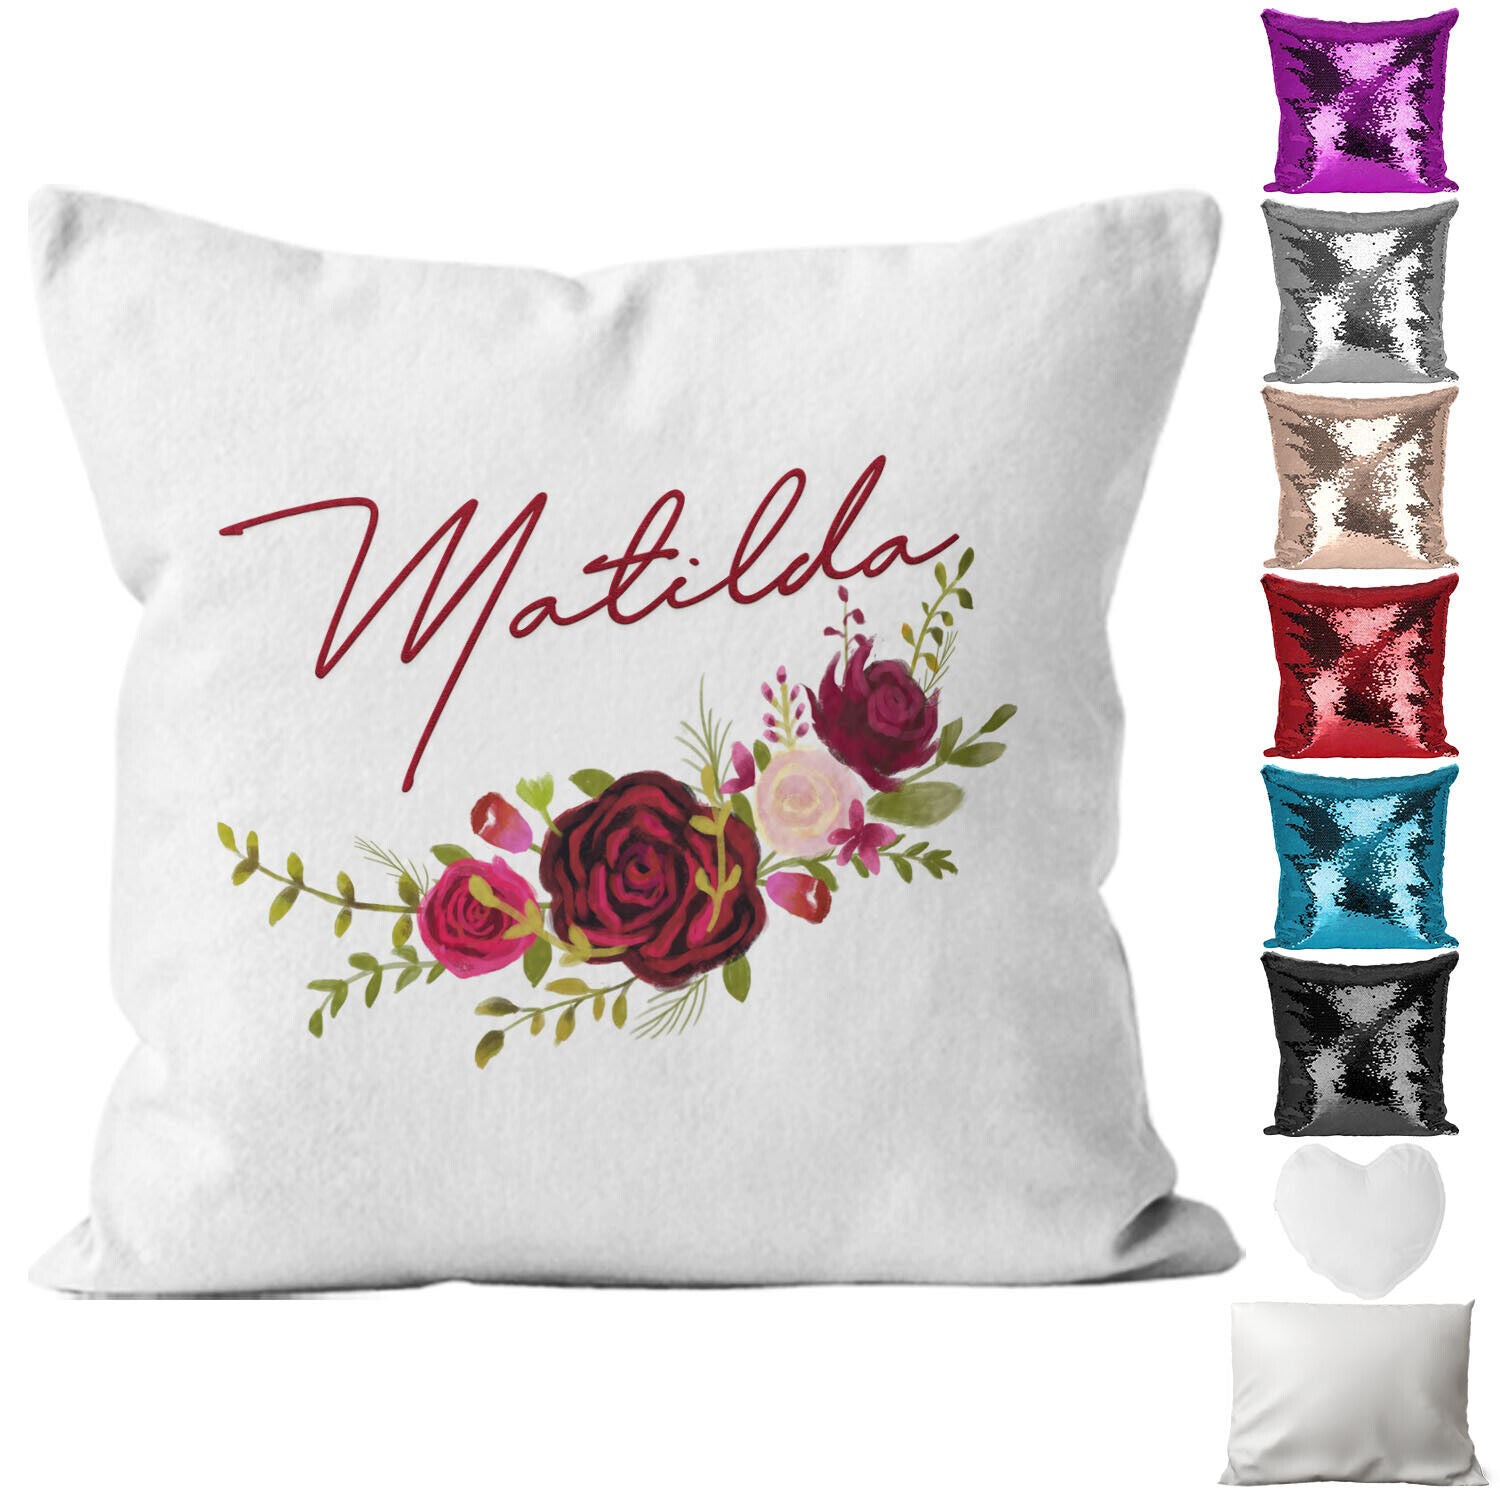 Personalised Cushion Floral Sequin Cushion Pillow Printed Birthday Gift 3